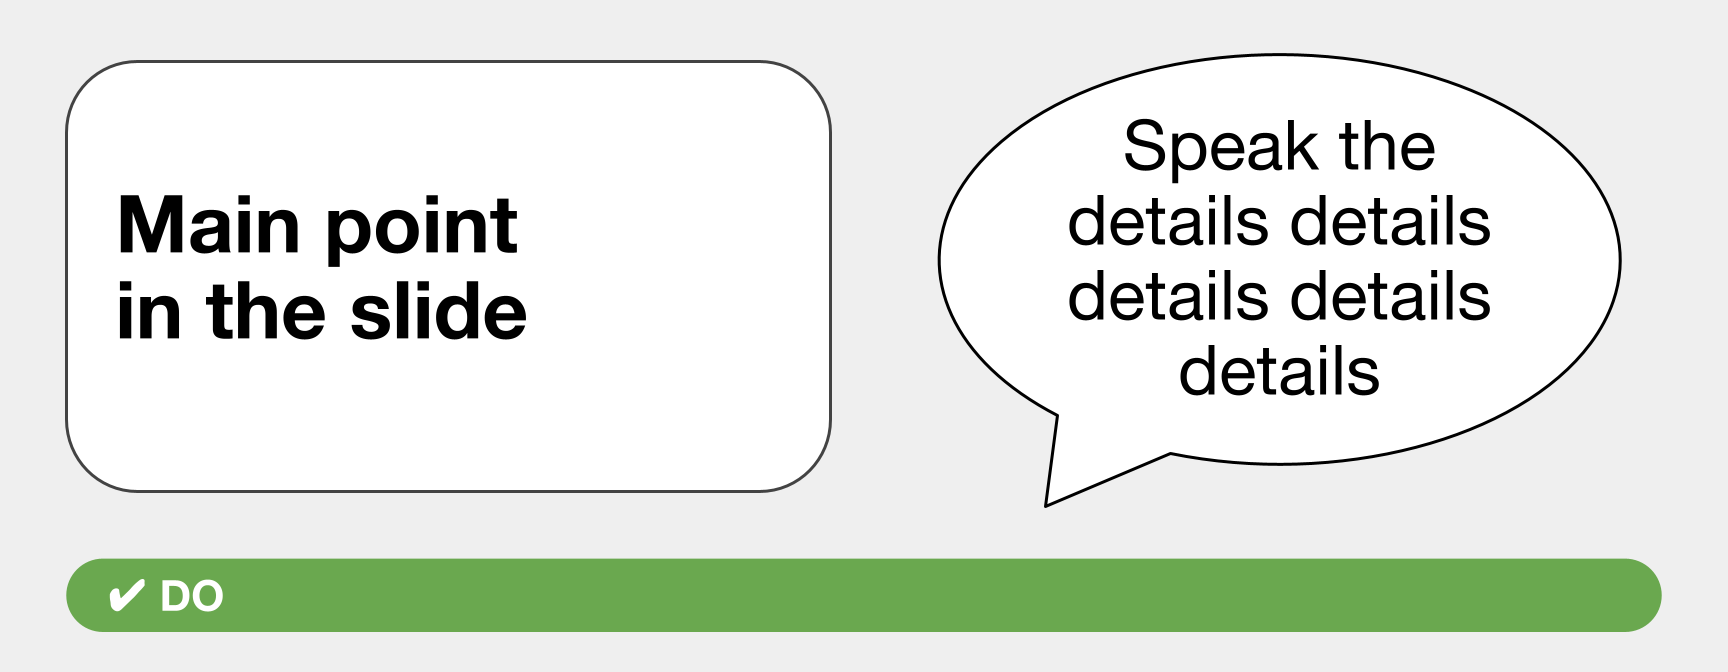 Example of what to do: a slide with "Main point in the slide" in it, and a speech bubble that says "Speak the details"